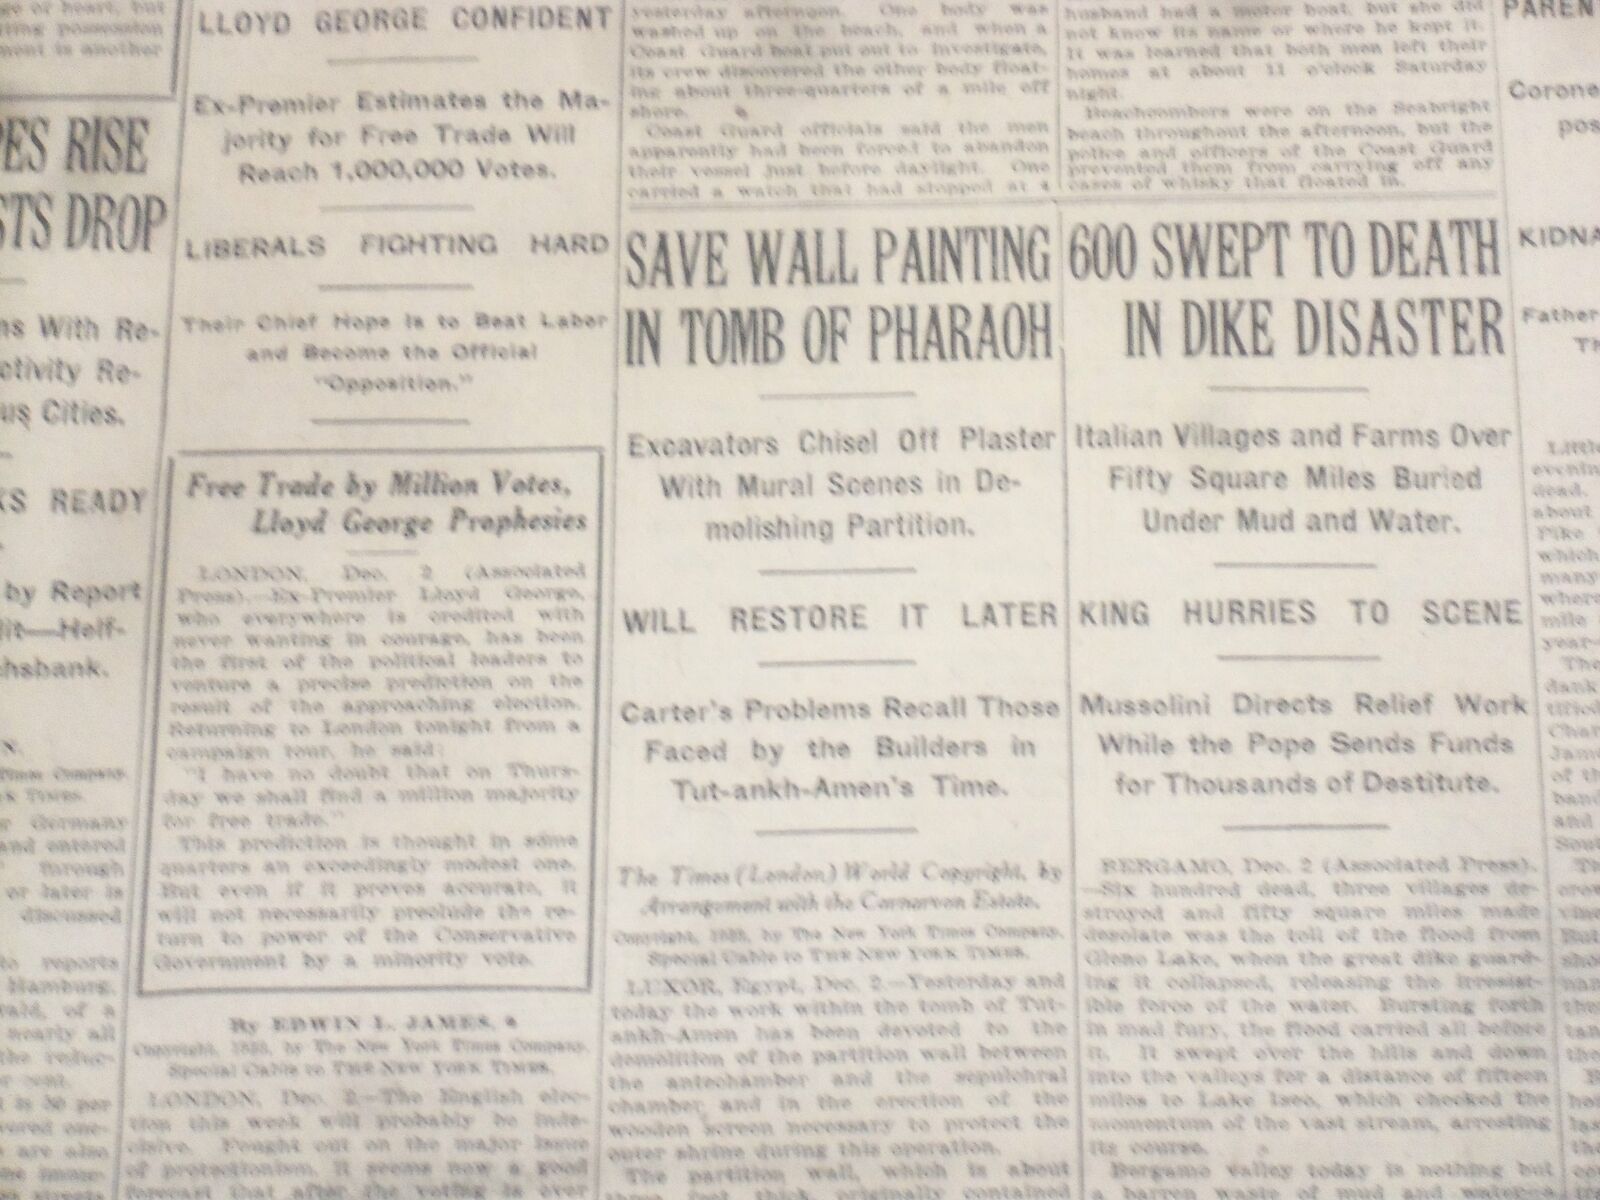 1923 DECEMBER 3 NEW YORK TIMES - SAVE PAINTING IN TOMB OF PHARAOH - NT 9211